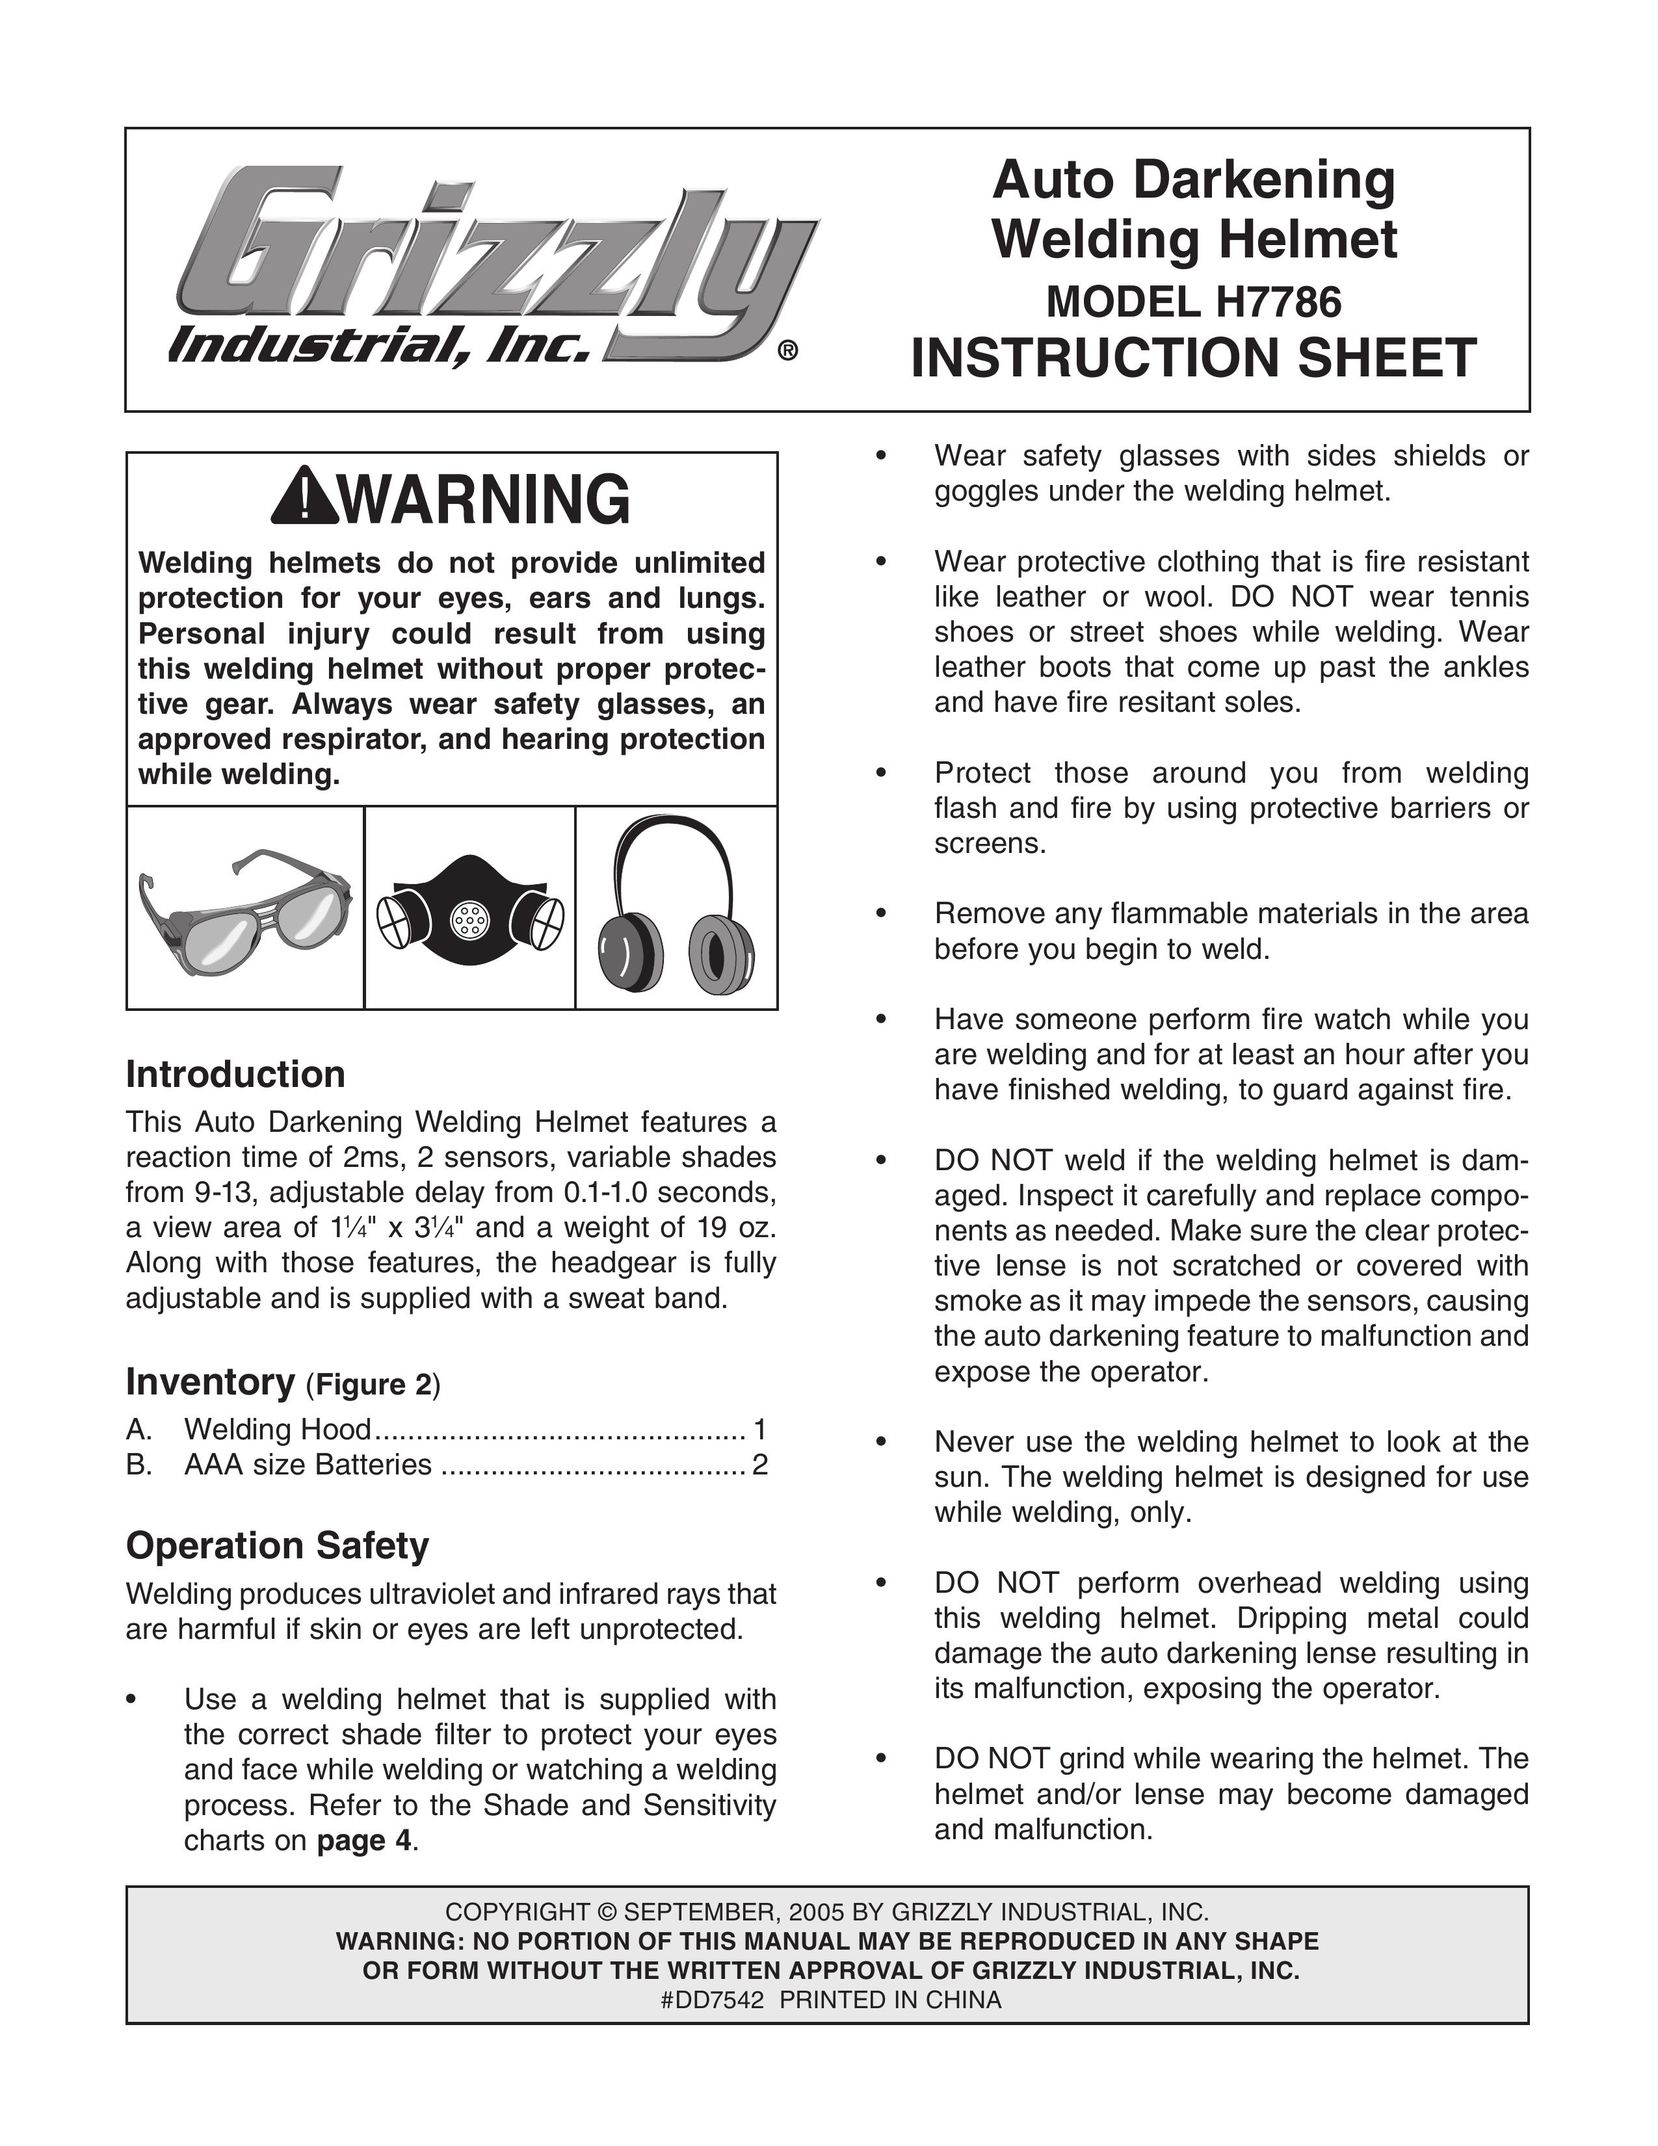 Grizzly DD7542 Welding System User Manual